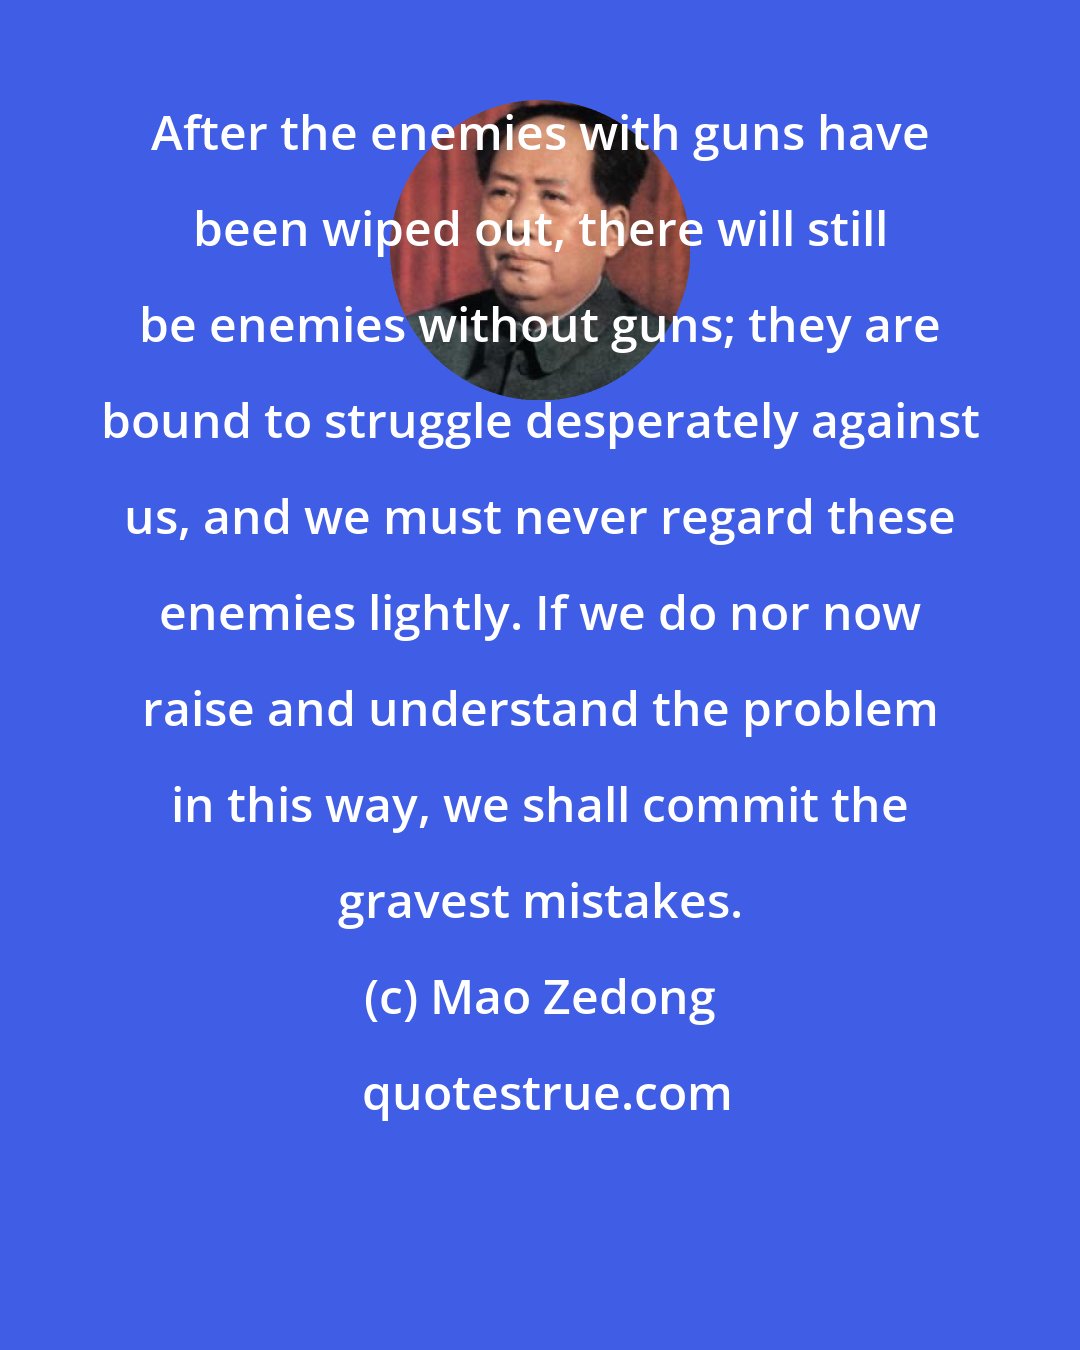 Mao Zedong: After the enemies with guns have been wiped out, there will still be enemies without guns; they are bound to struggle desperately against us, and we must never regard these enemies lightly. If we do nor now raise and understand the problem in this way, we shall commit the gravest mistakes.